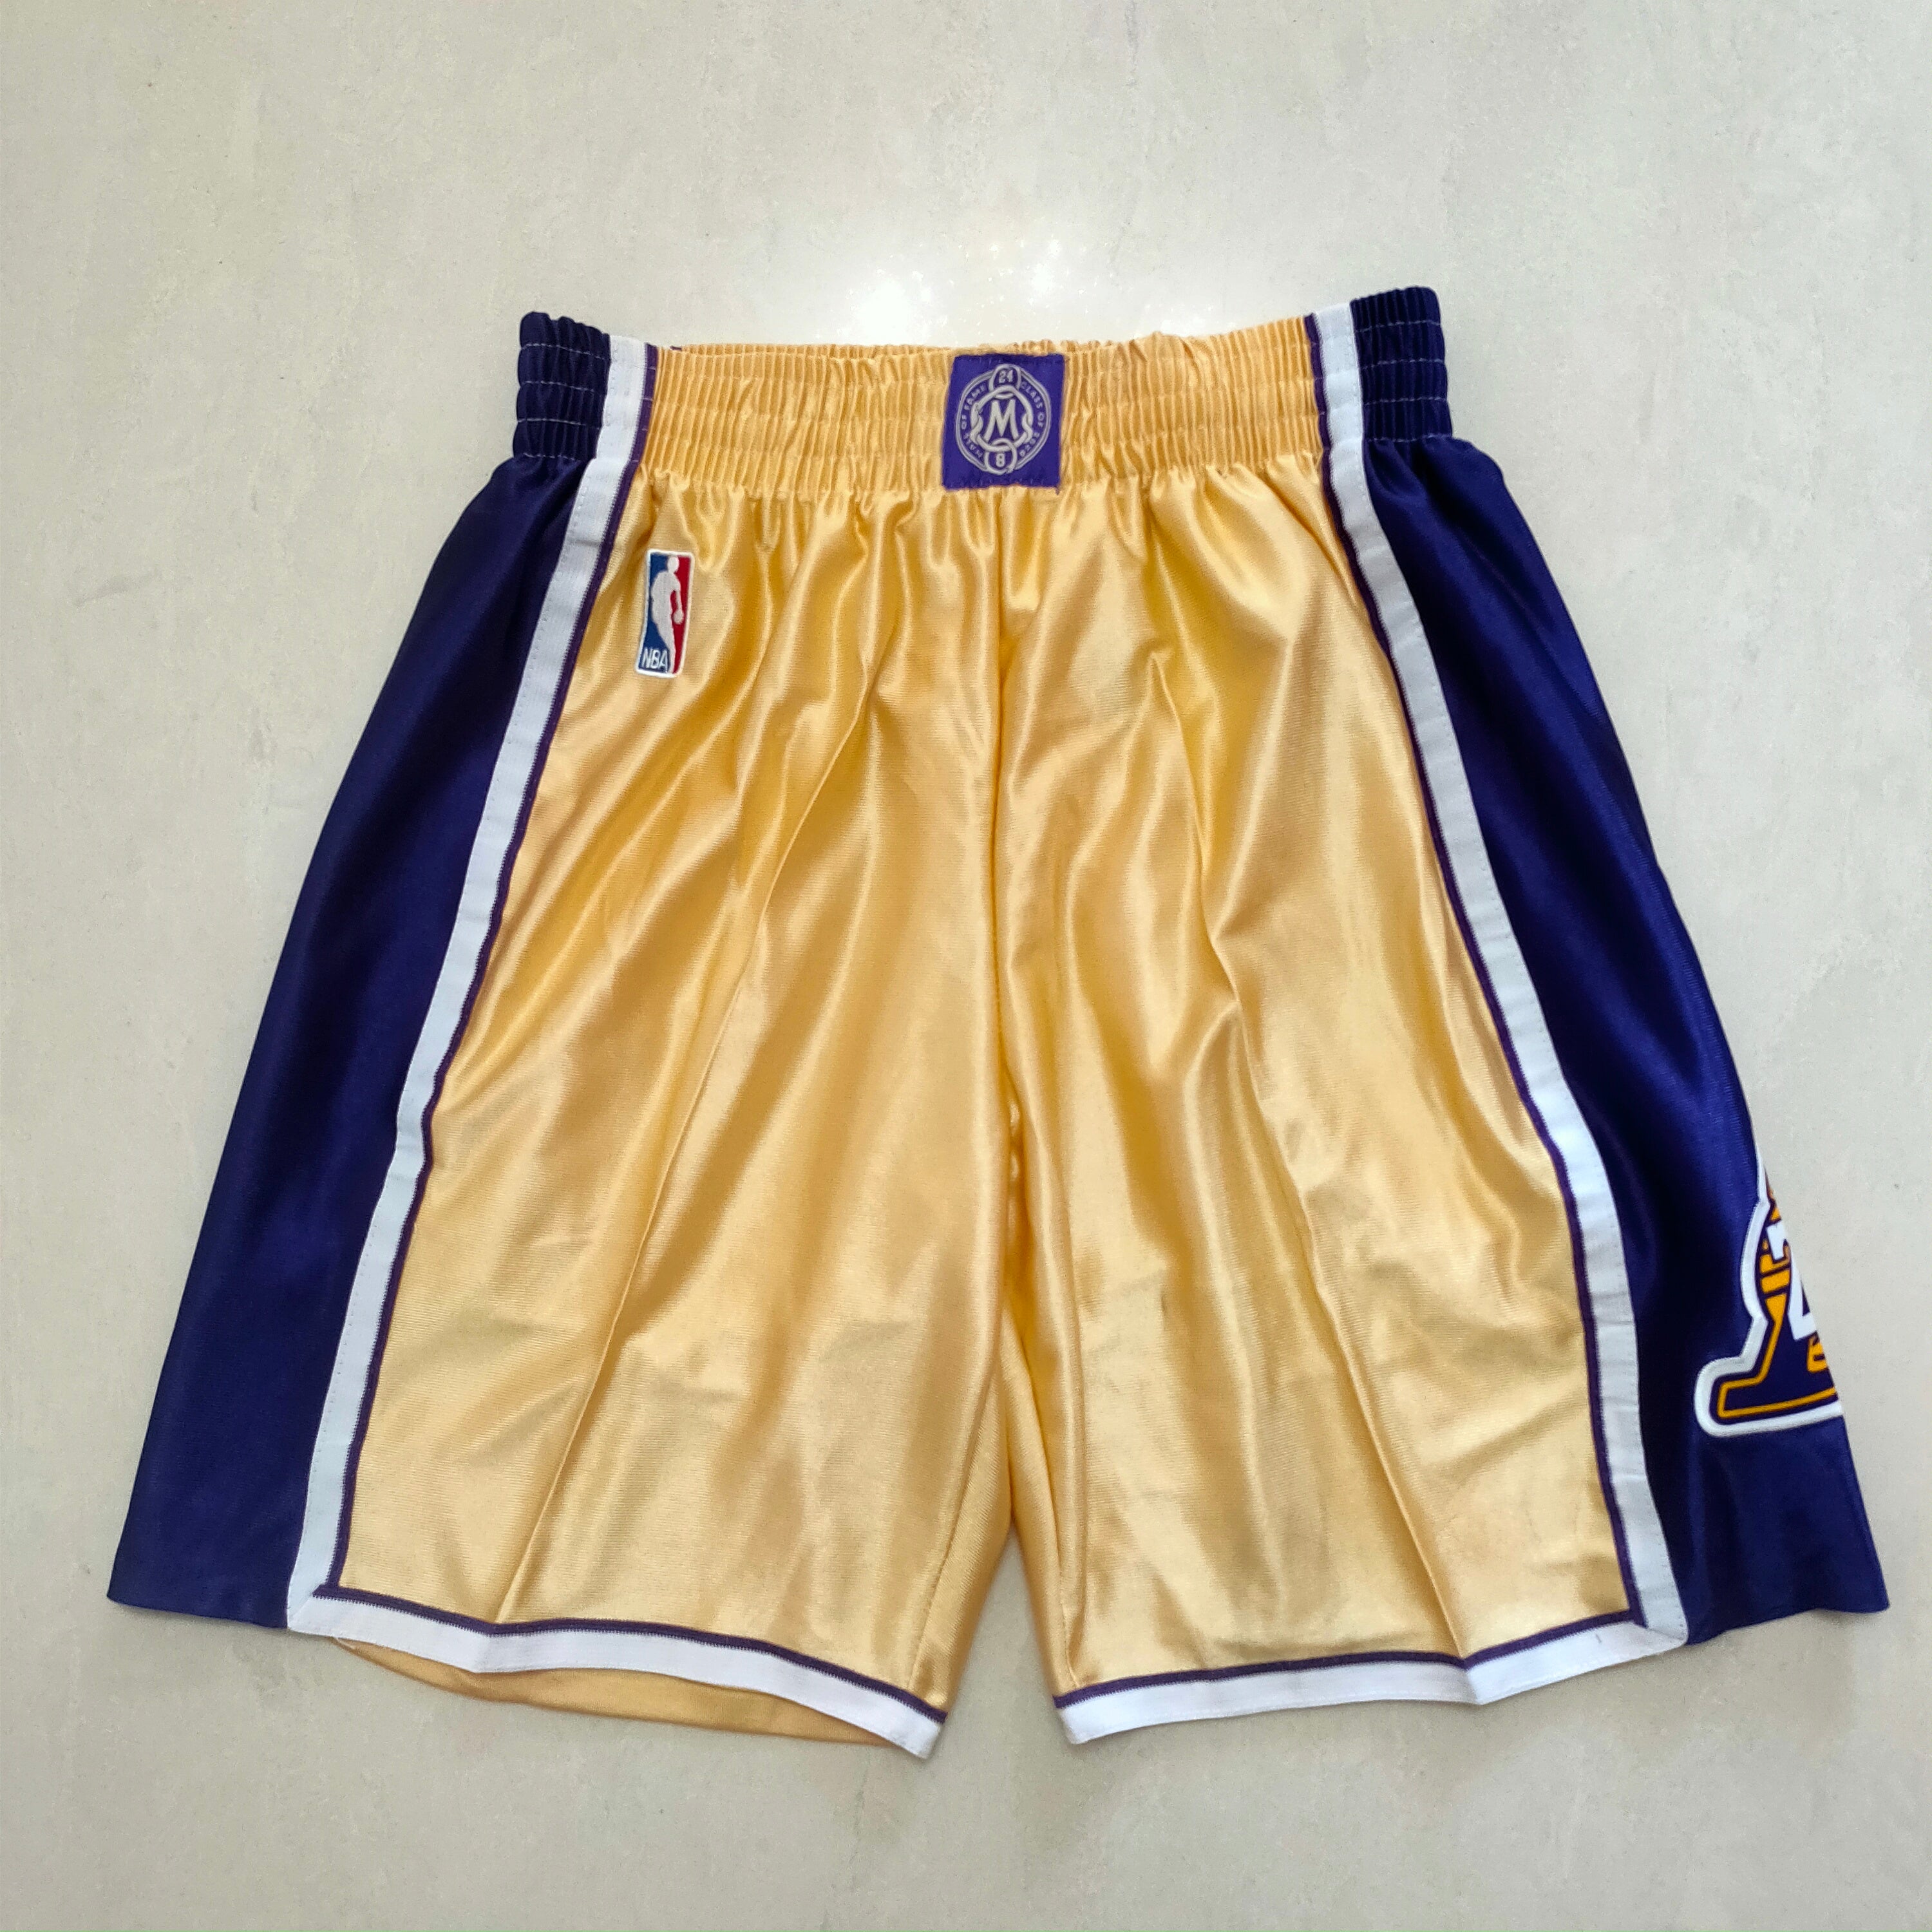 Lakers silky yellow/navy blue shorts